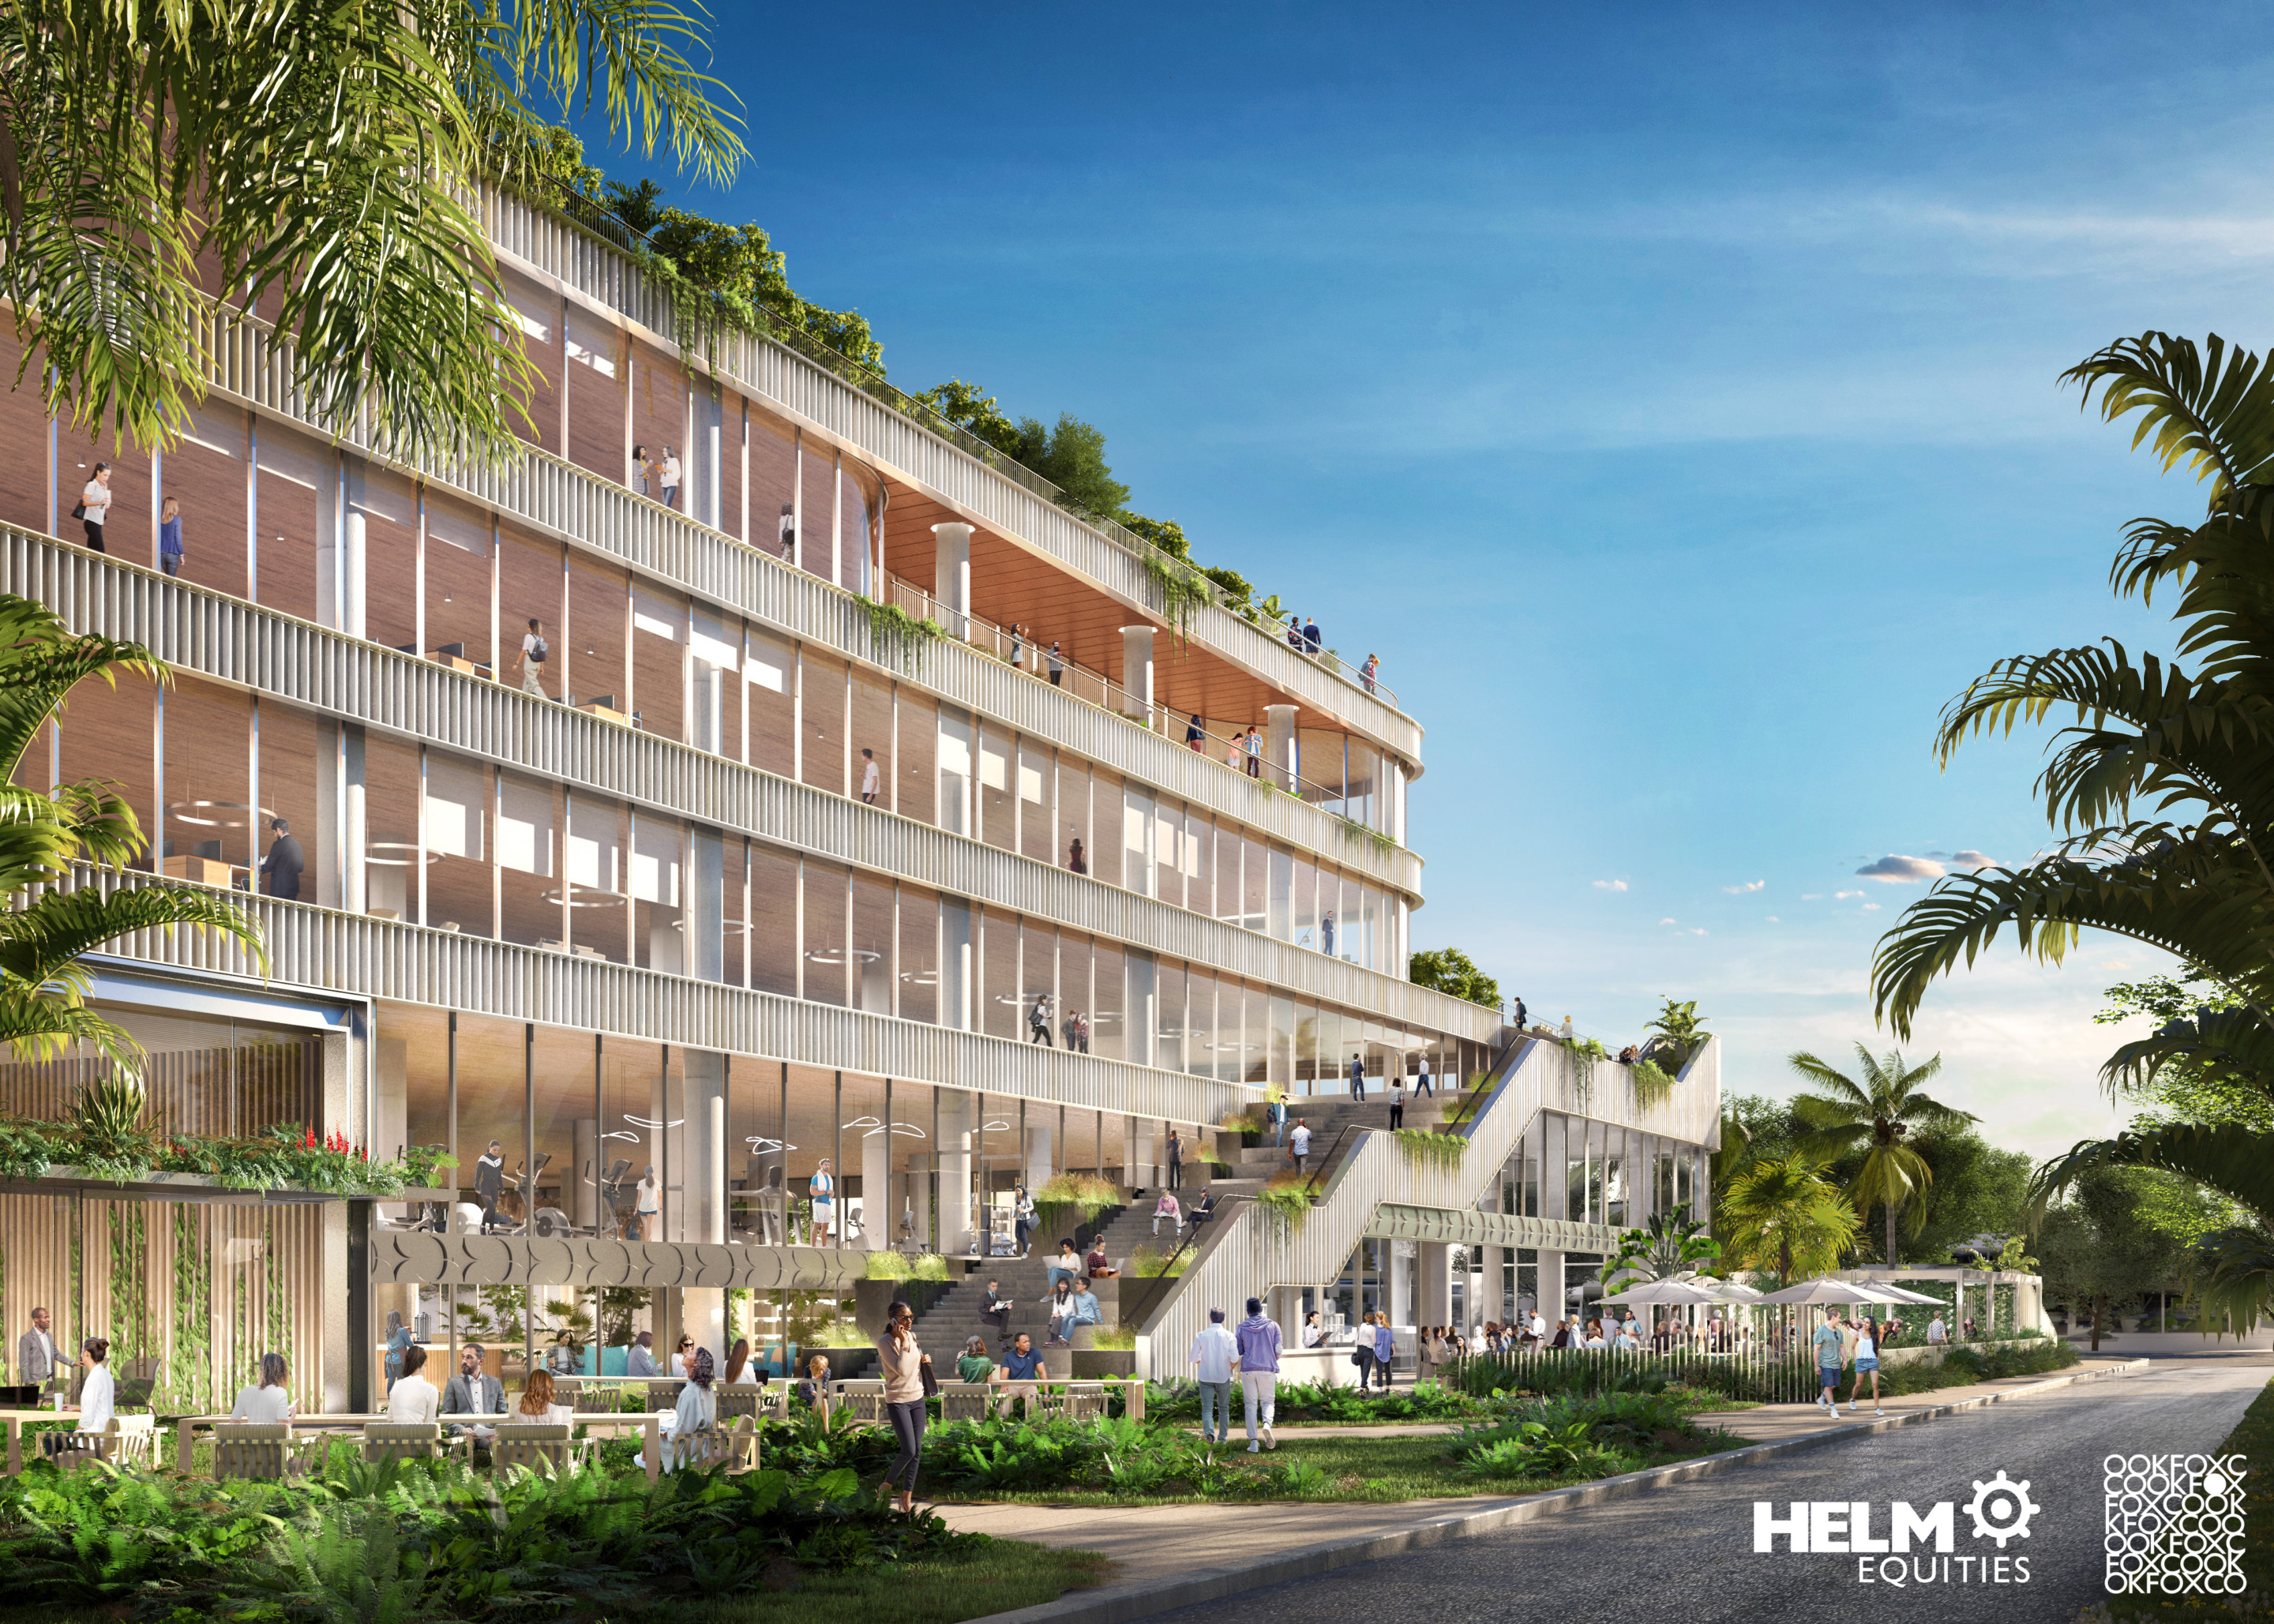 rendering of a lushly landscaped mixed-use building